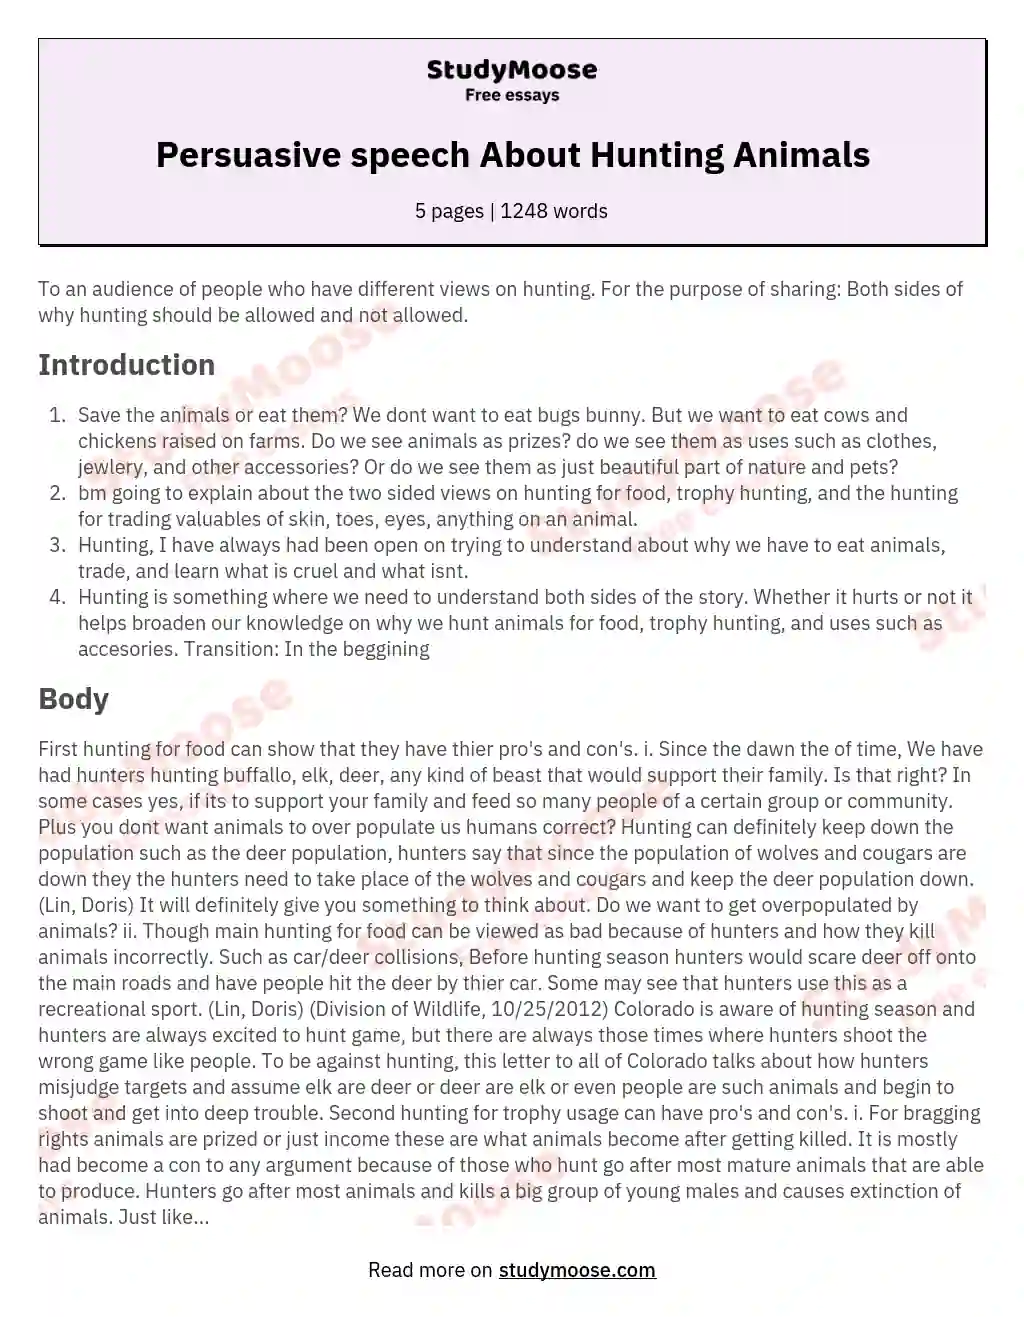 Persuasive speech About Hunting Animals Free Essay Example